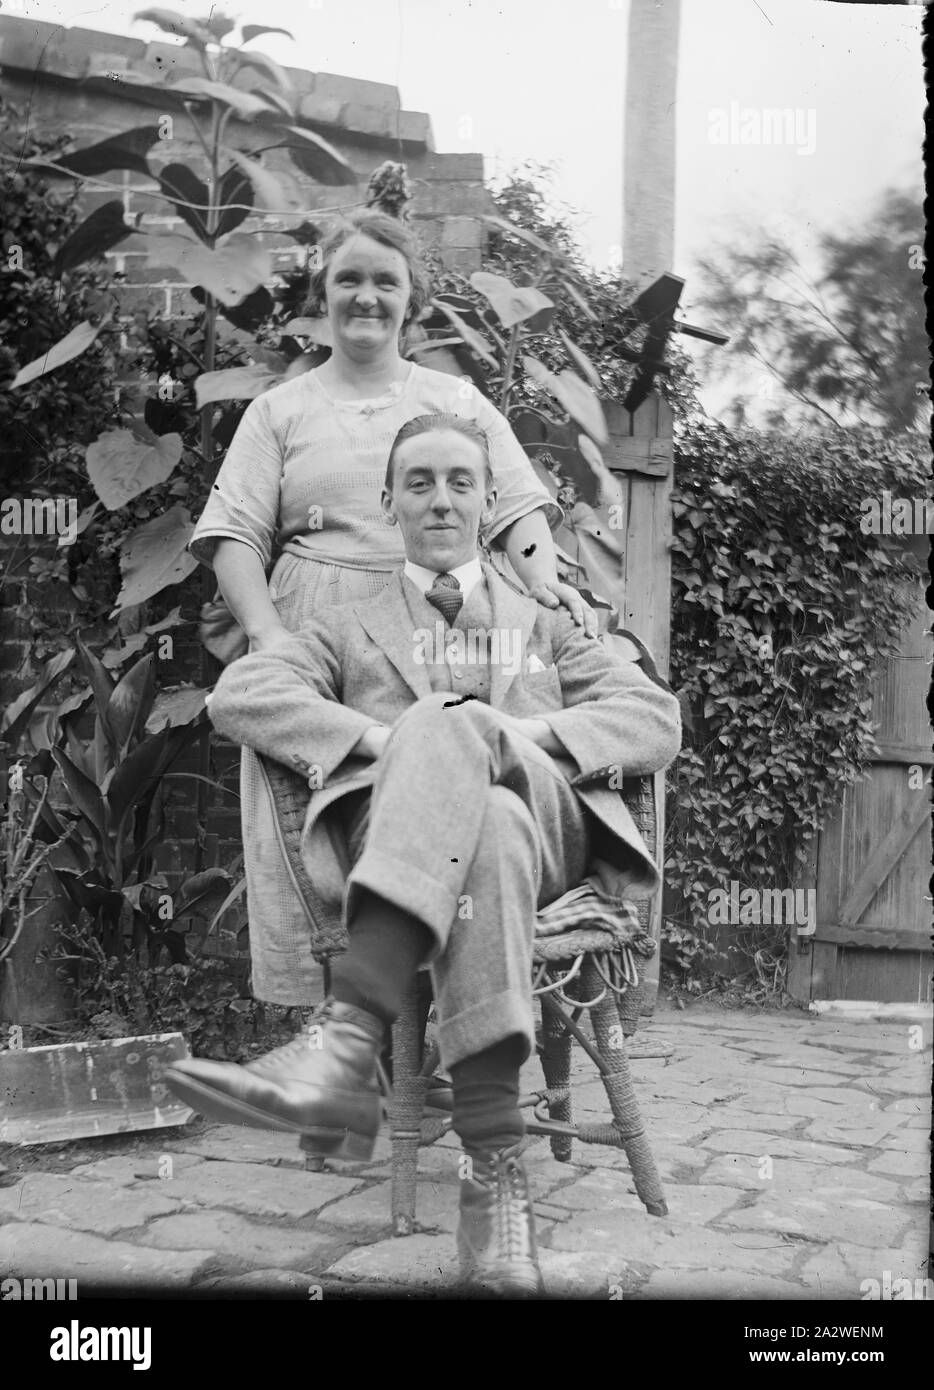 Glass Negative - Couple in Garden, circa 1920s - 1930s, Black and white 1/6th plate glass negative of a couple in a back garden or courtyard. The man is seated cross legged in a chair and the woman stands behind him. collection of products, promotional materials, photographs and working life artefacts, when the Melbourne manufacturing plant at Coburg closed down Stock Photo